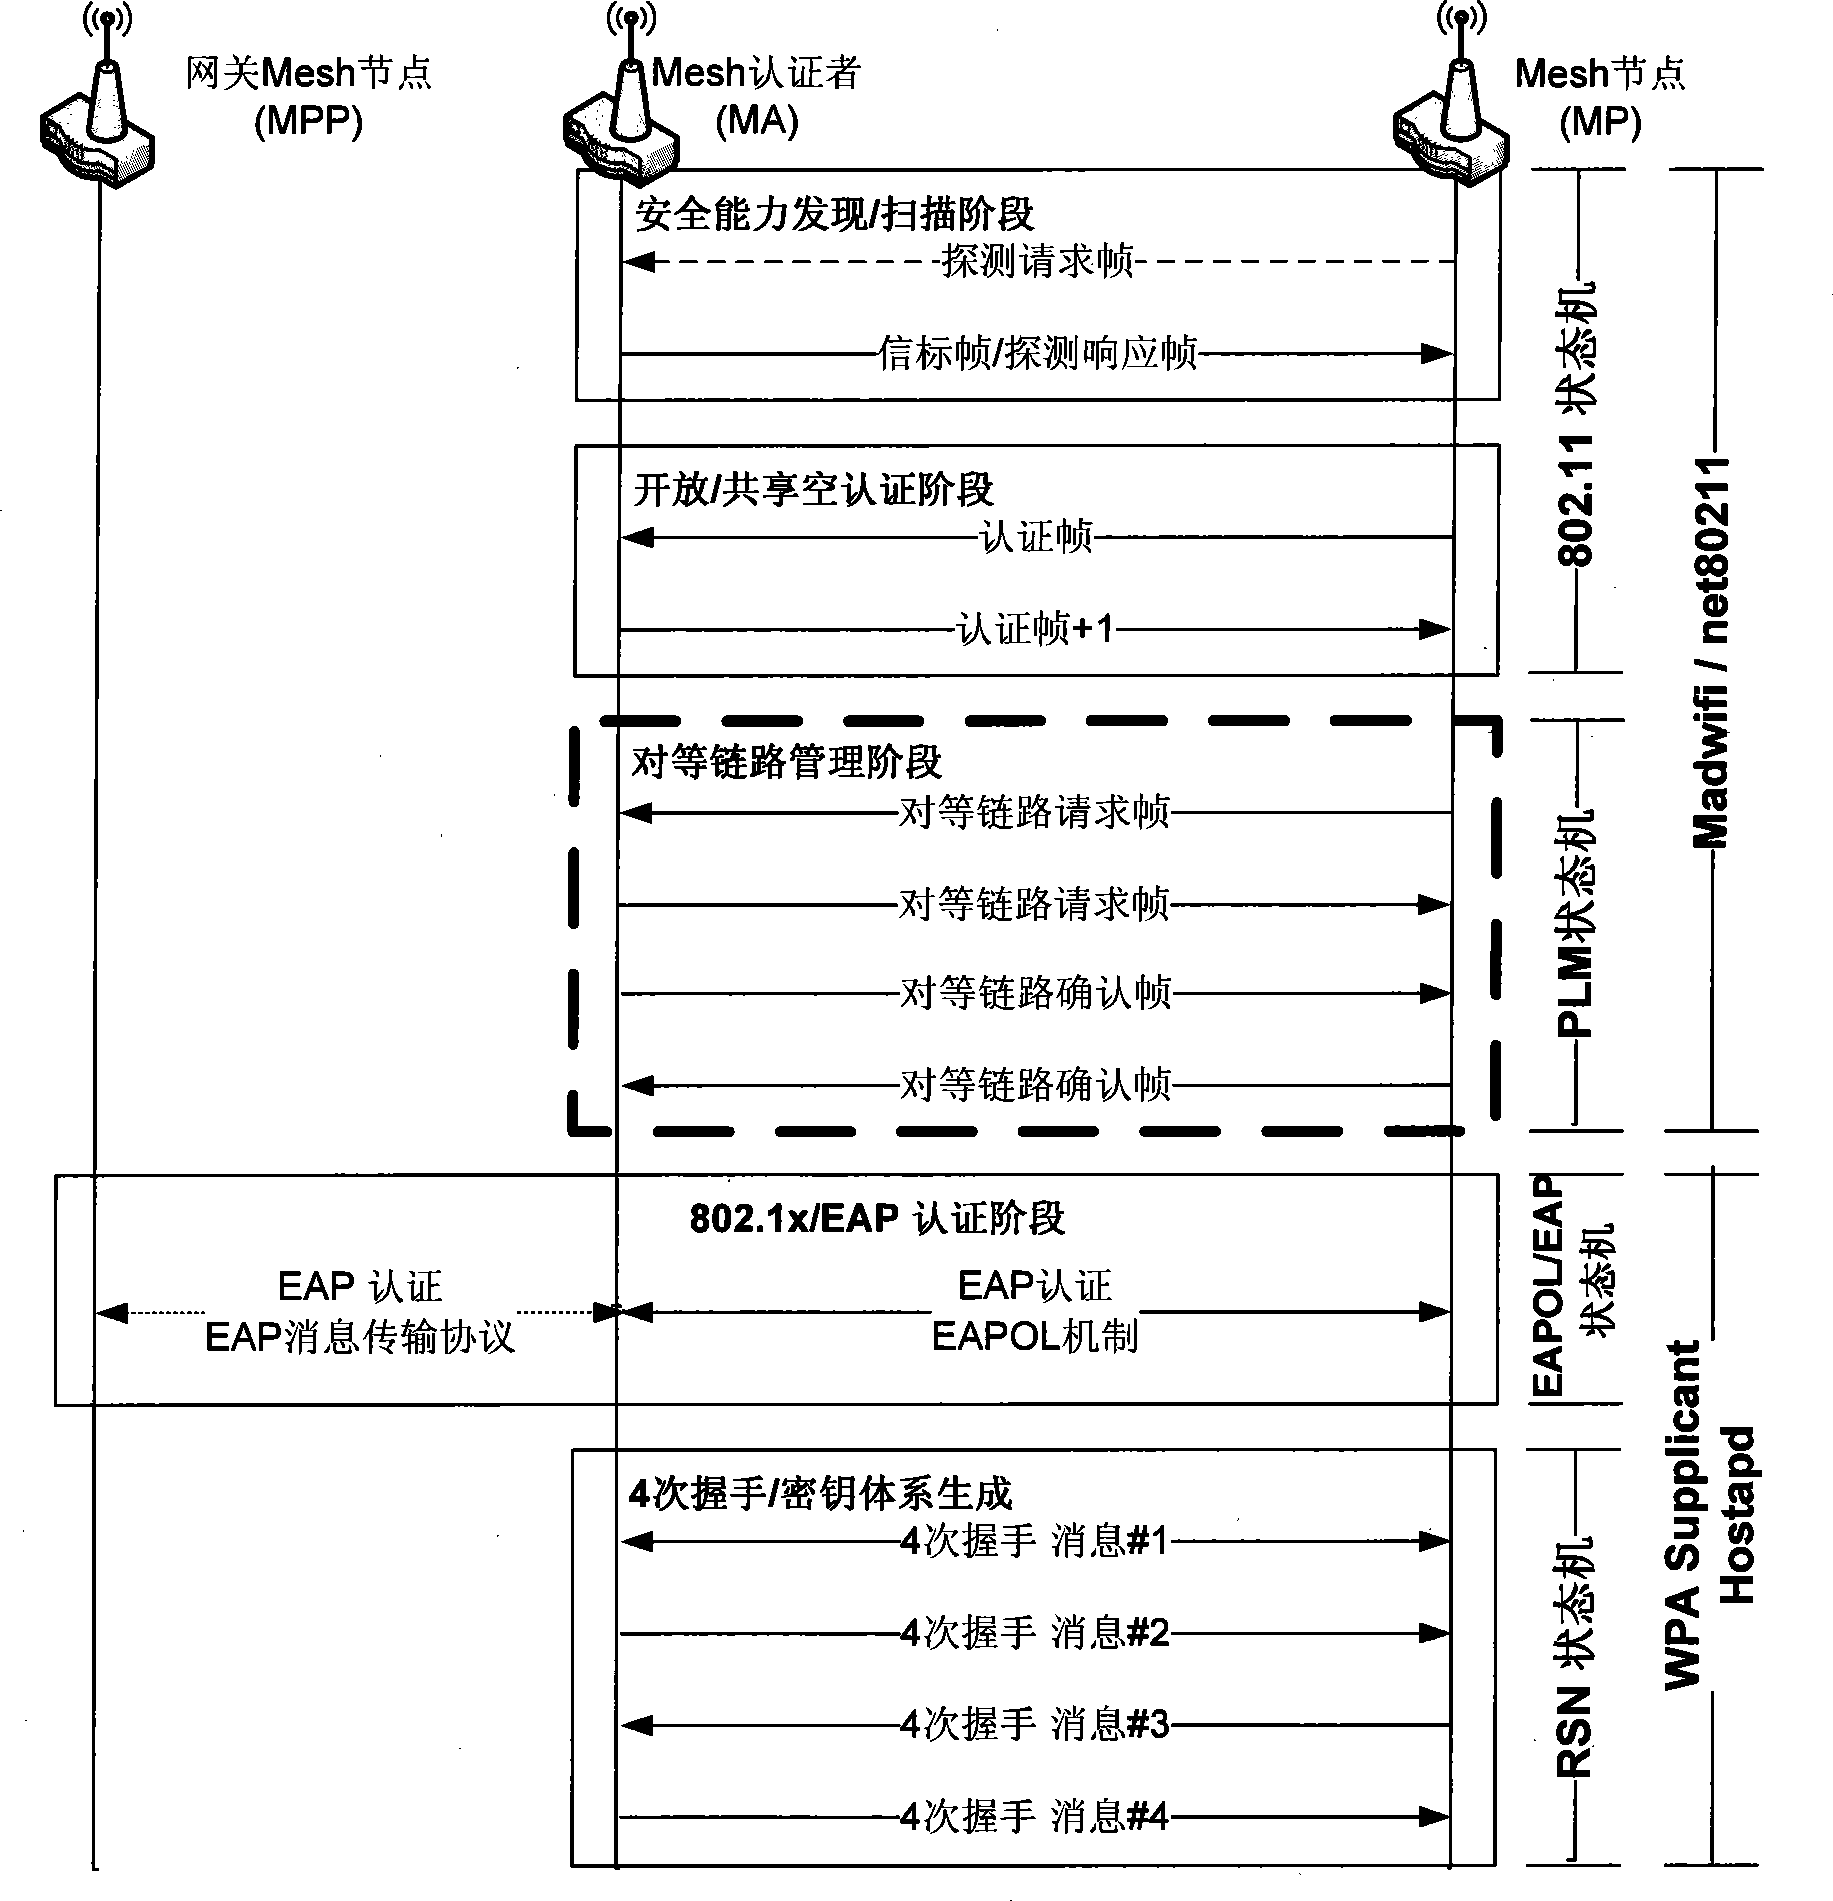 Wireless mesh network access security authentication method based on WLAN